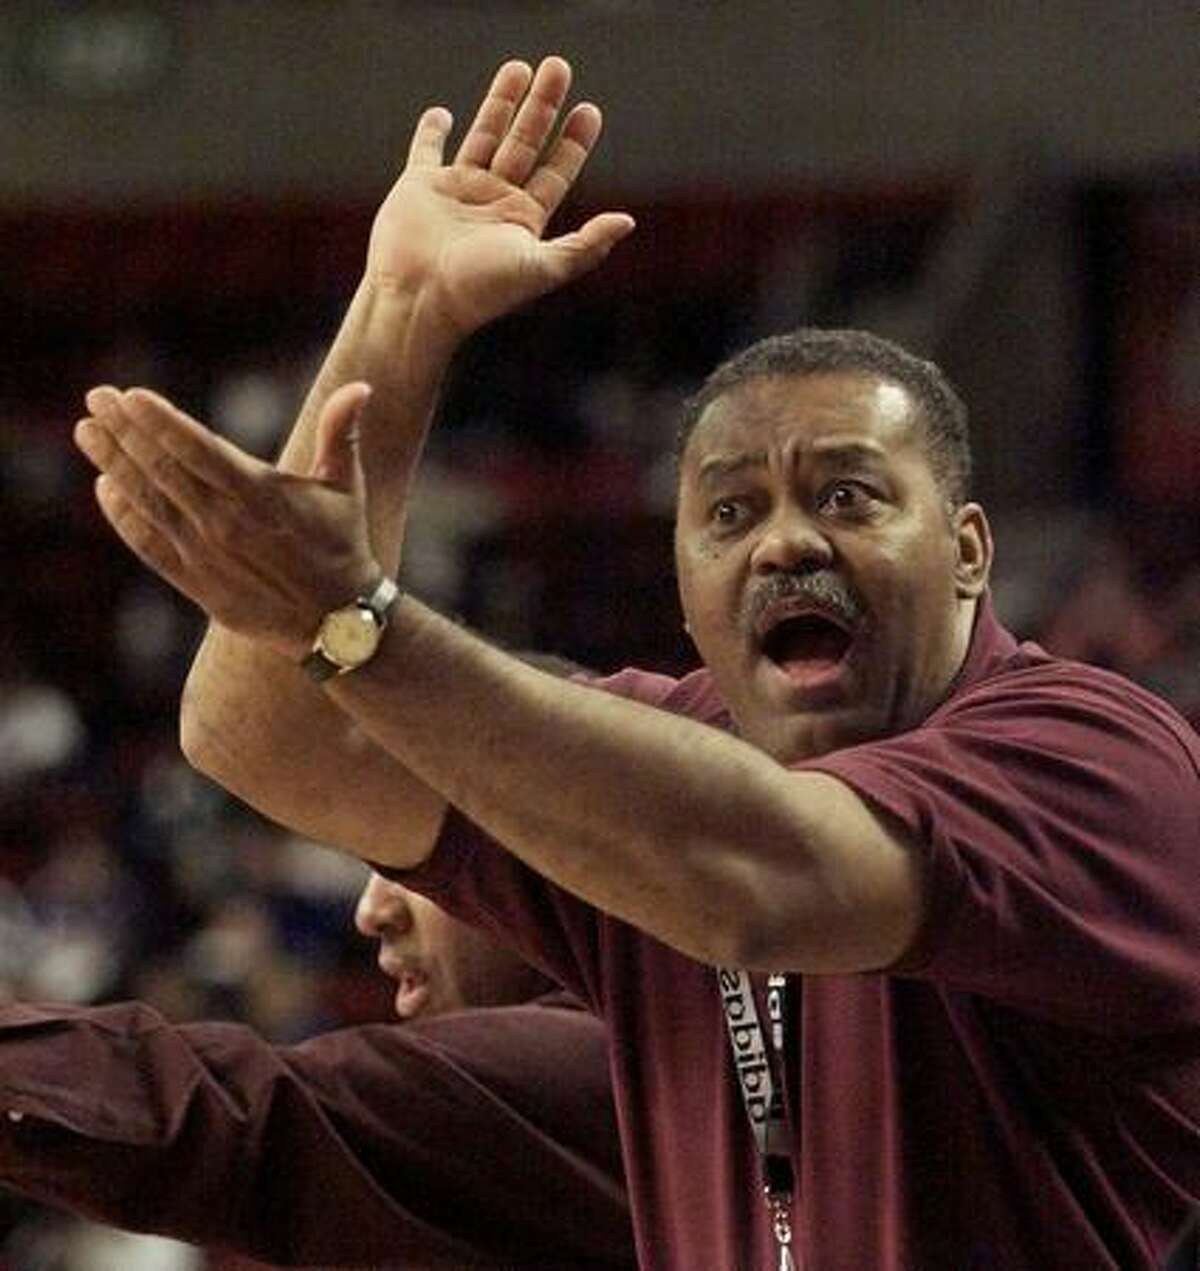 O'Dea basketball coach Phil Lumpkin scolds the referees during his team's loss to the Franklin Quakers, Jan. 17, 2000. (Mike Urban/seattlepi.com file)